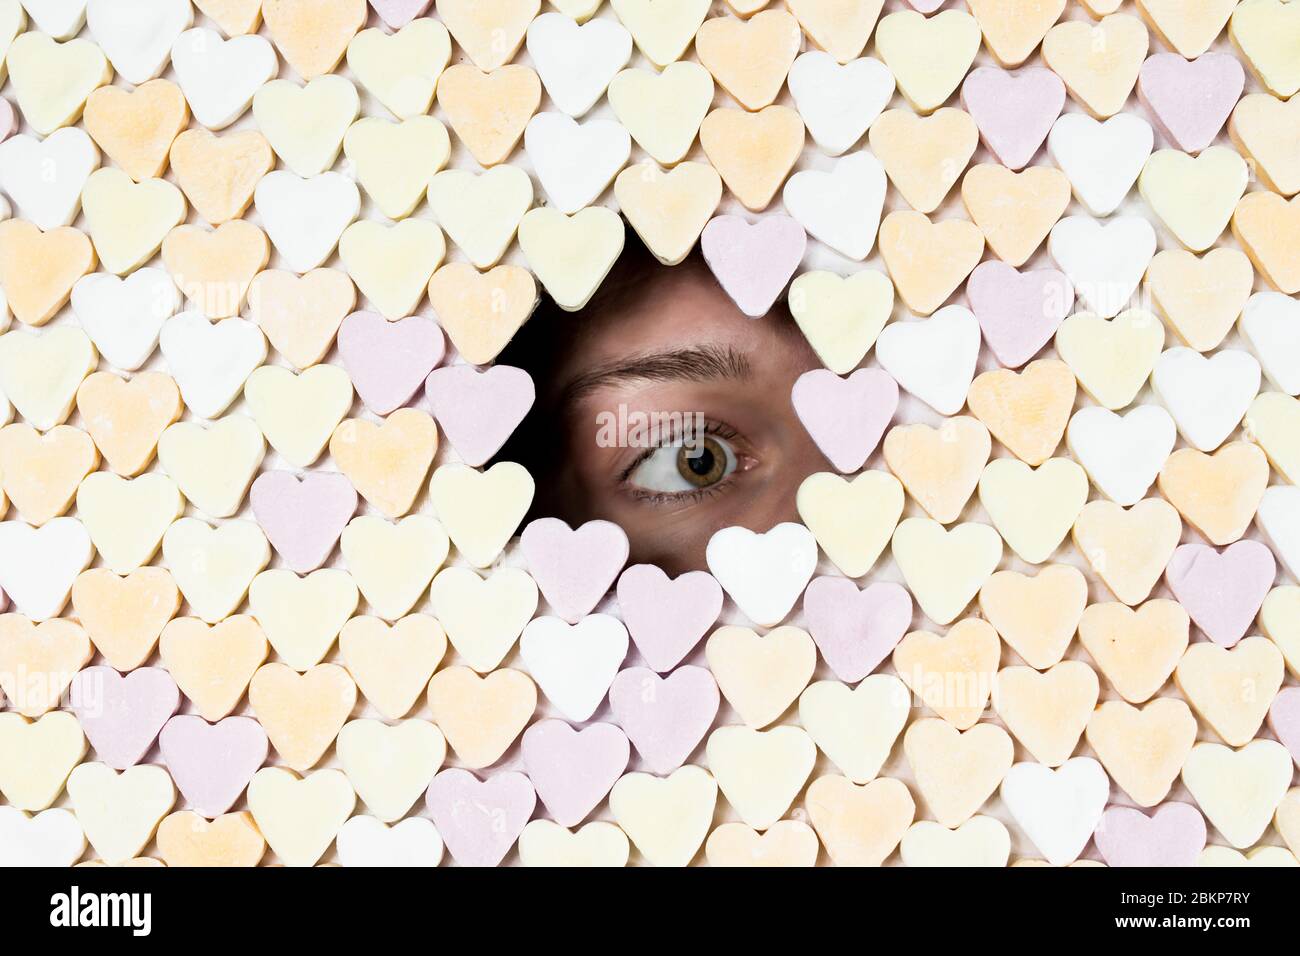 Girl peaking through hole in wall of heart-shaped sweets. Royalty free stock photo. Stock Photo